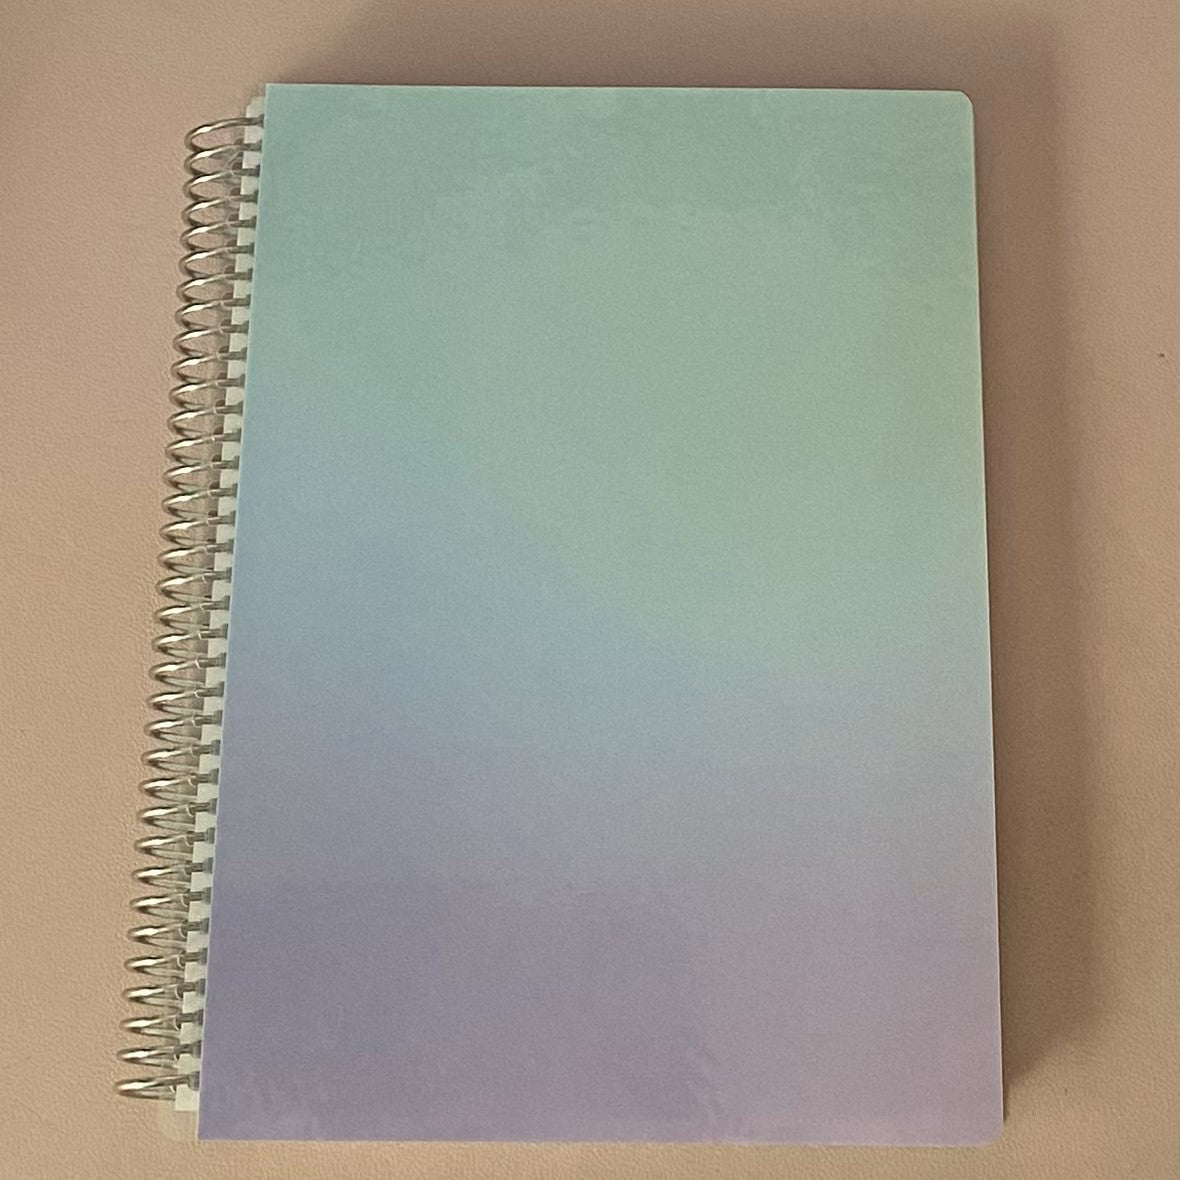 Daily Thoughts Notebook Purple and Blue Ombre